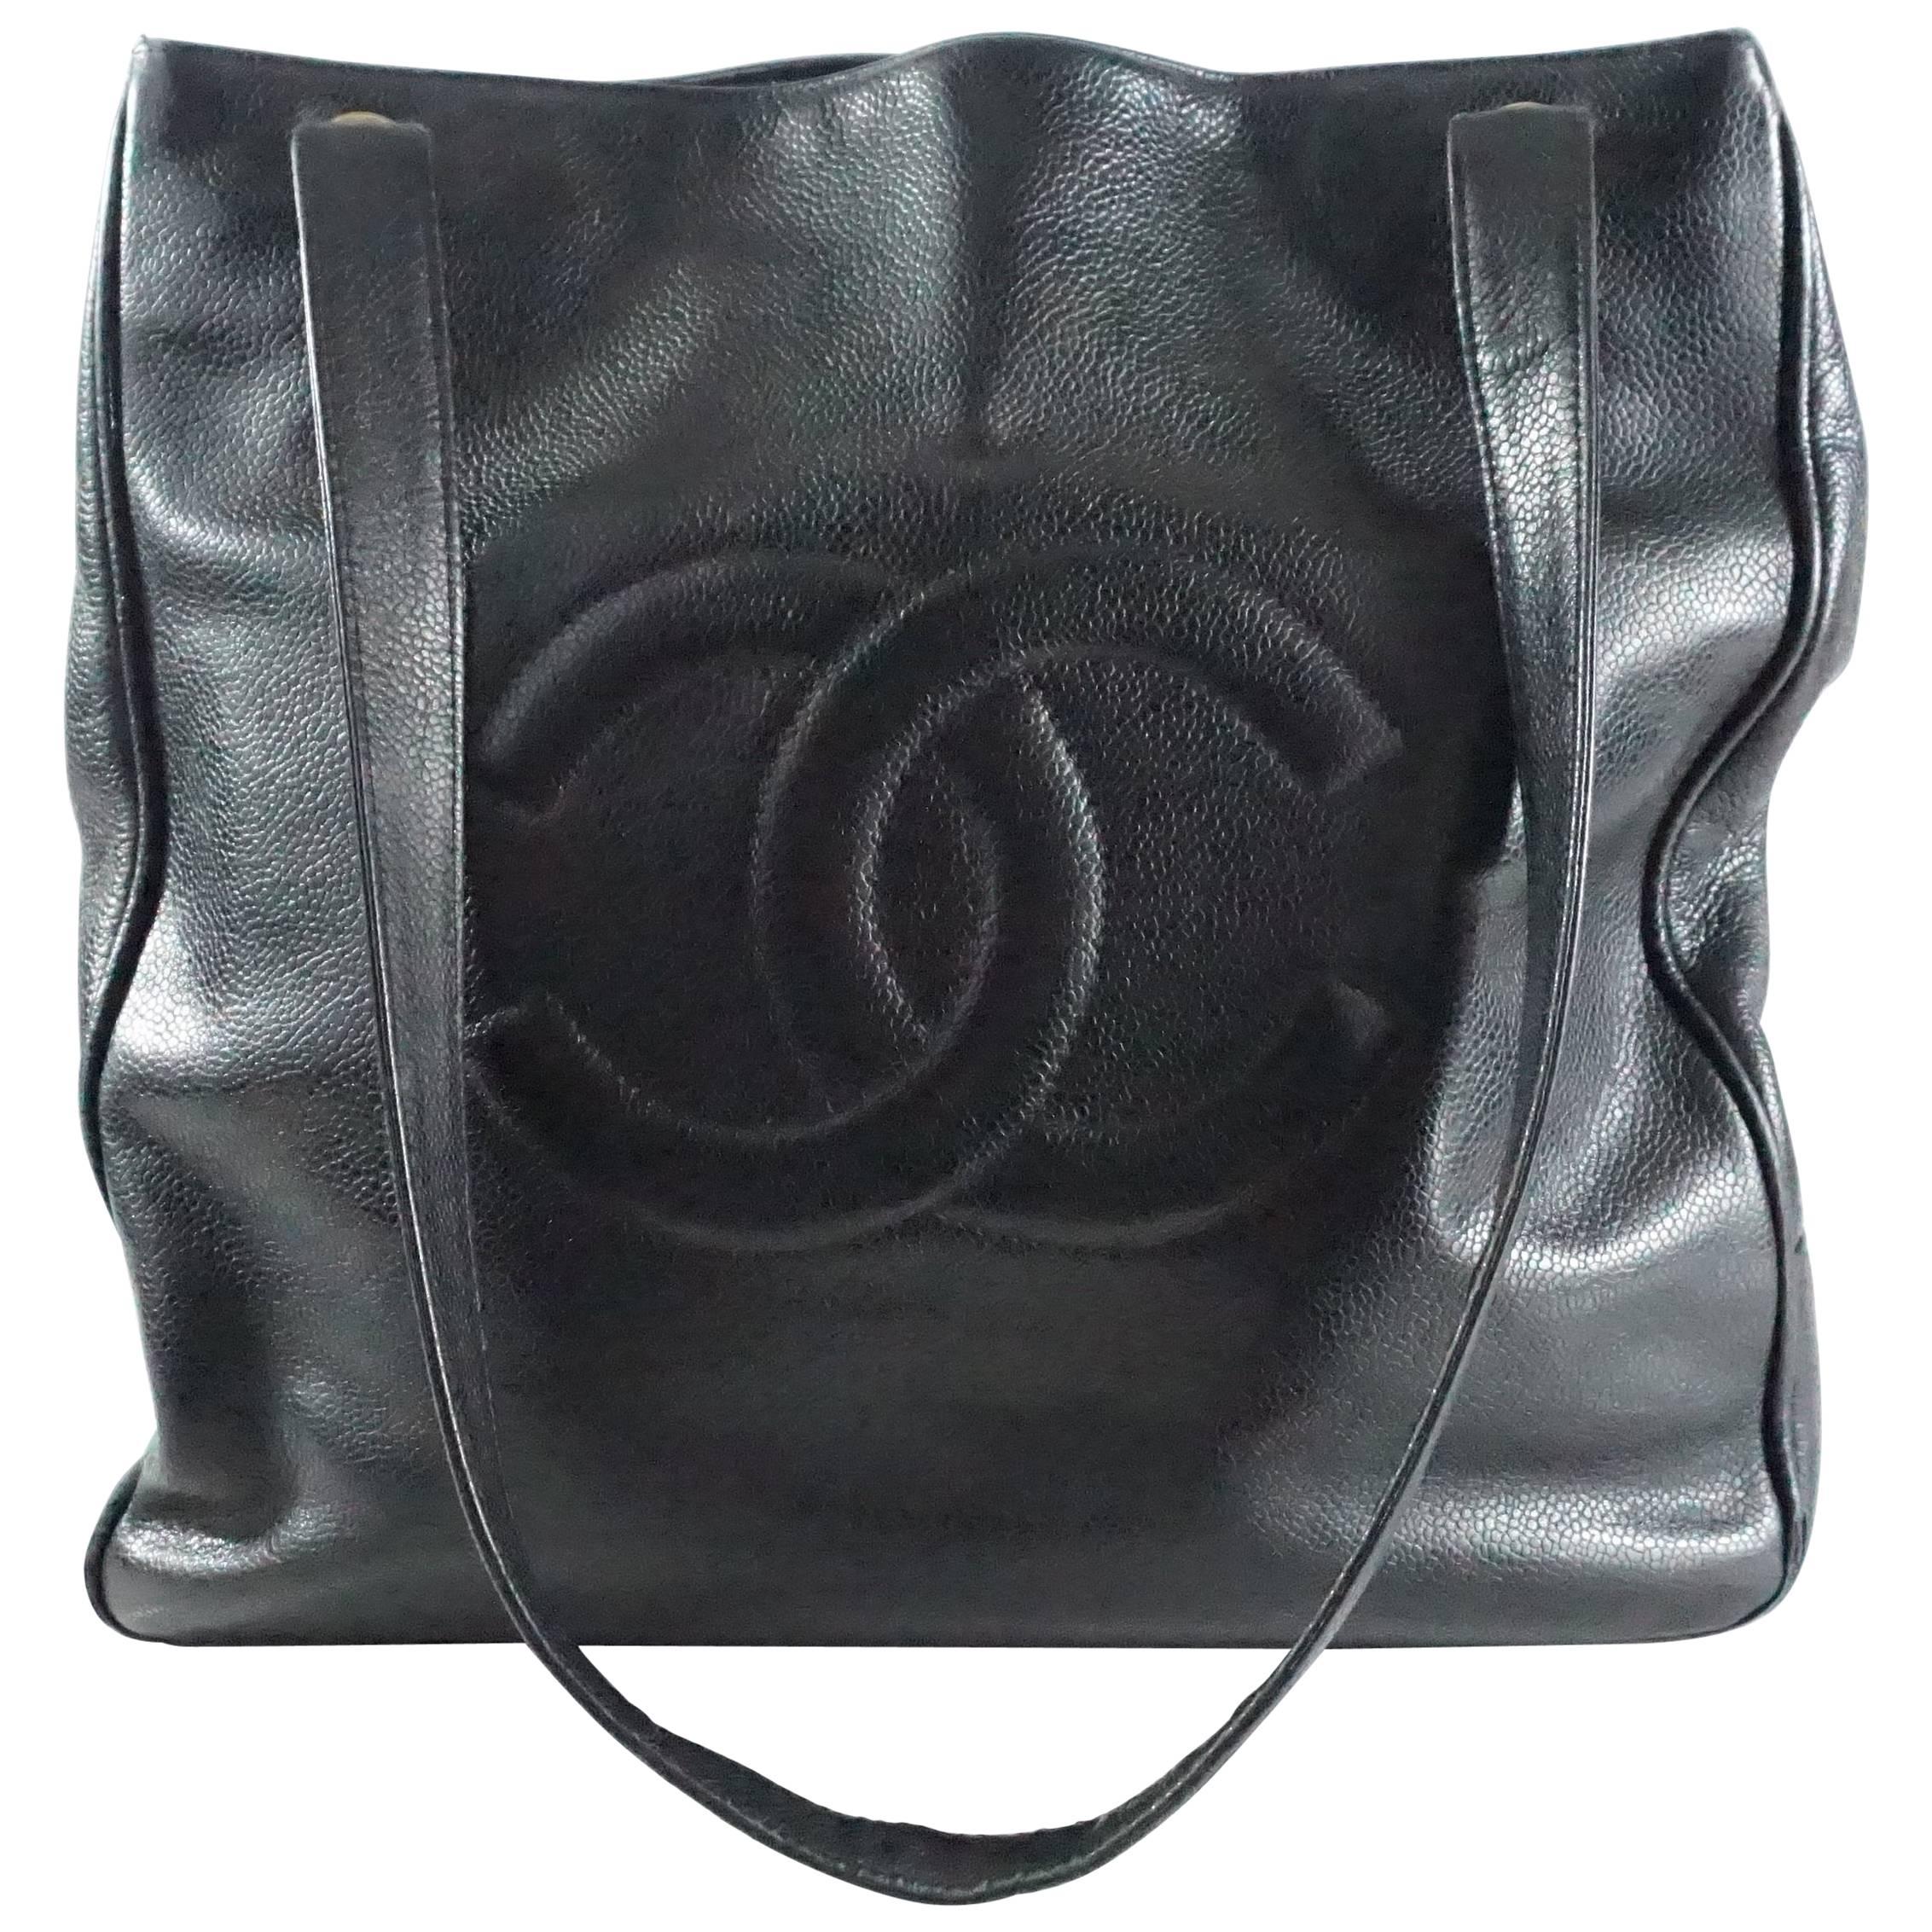 Chanel Black Caviar Tote with Front "CC" - circa early 1990's